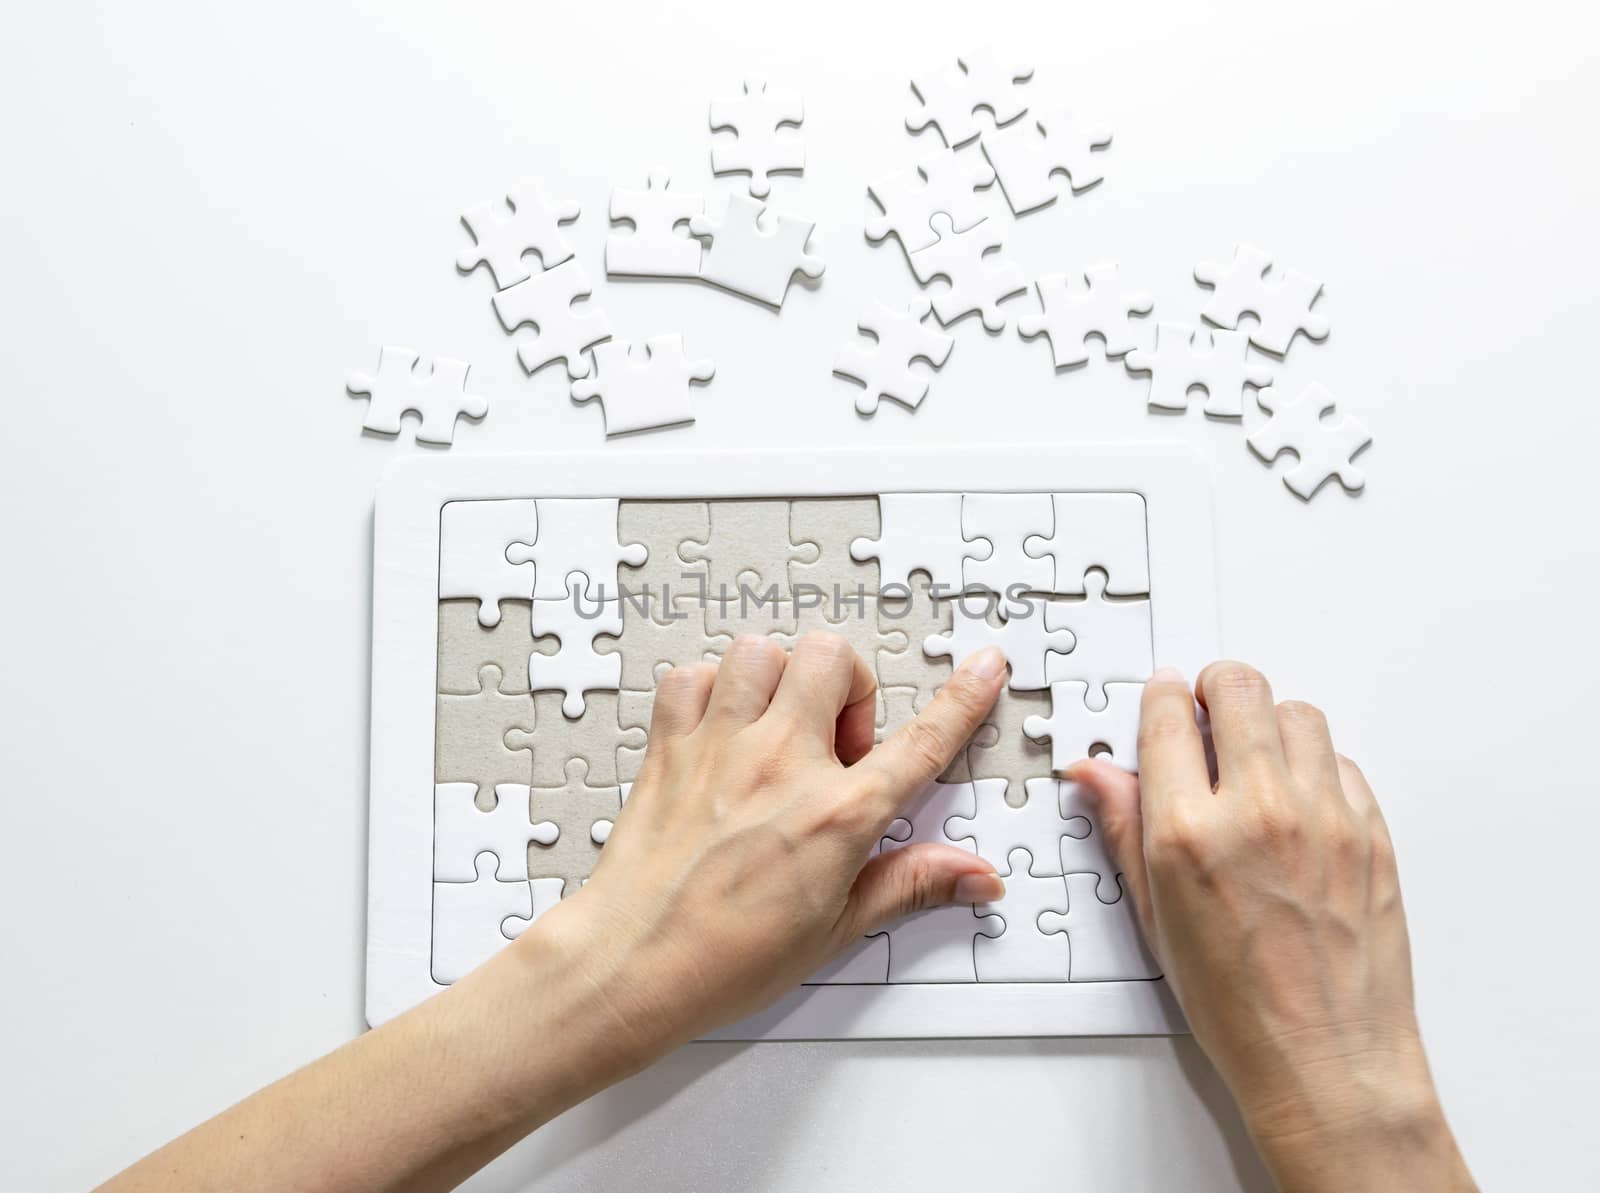 Fill the missing parts fragment of white jigsaw concept puzzle for succeed